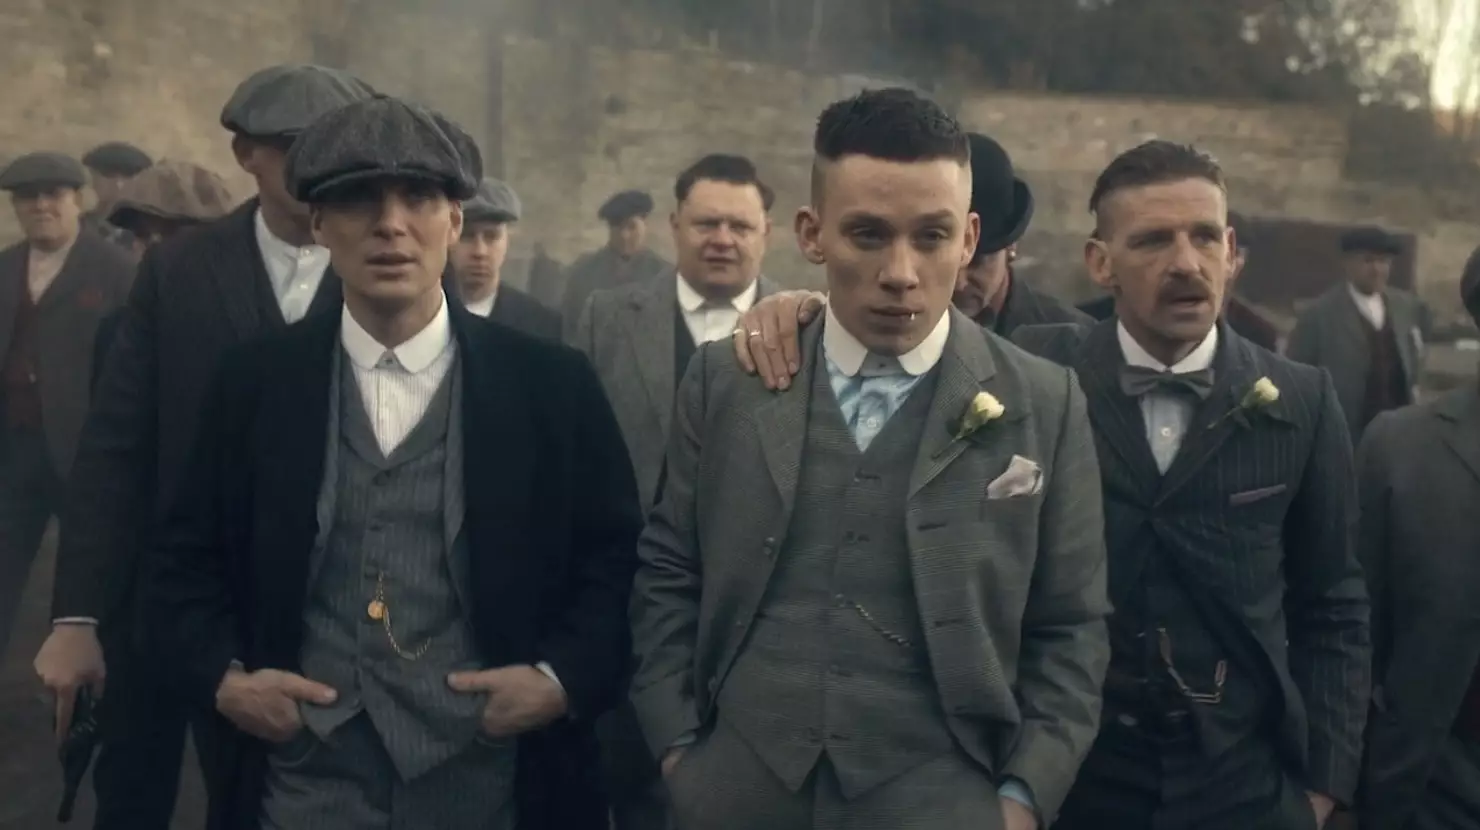 If you like 'Peaky Blinders' you'll love this (